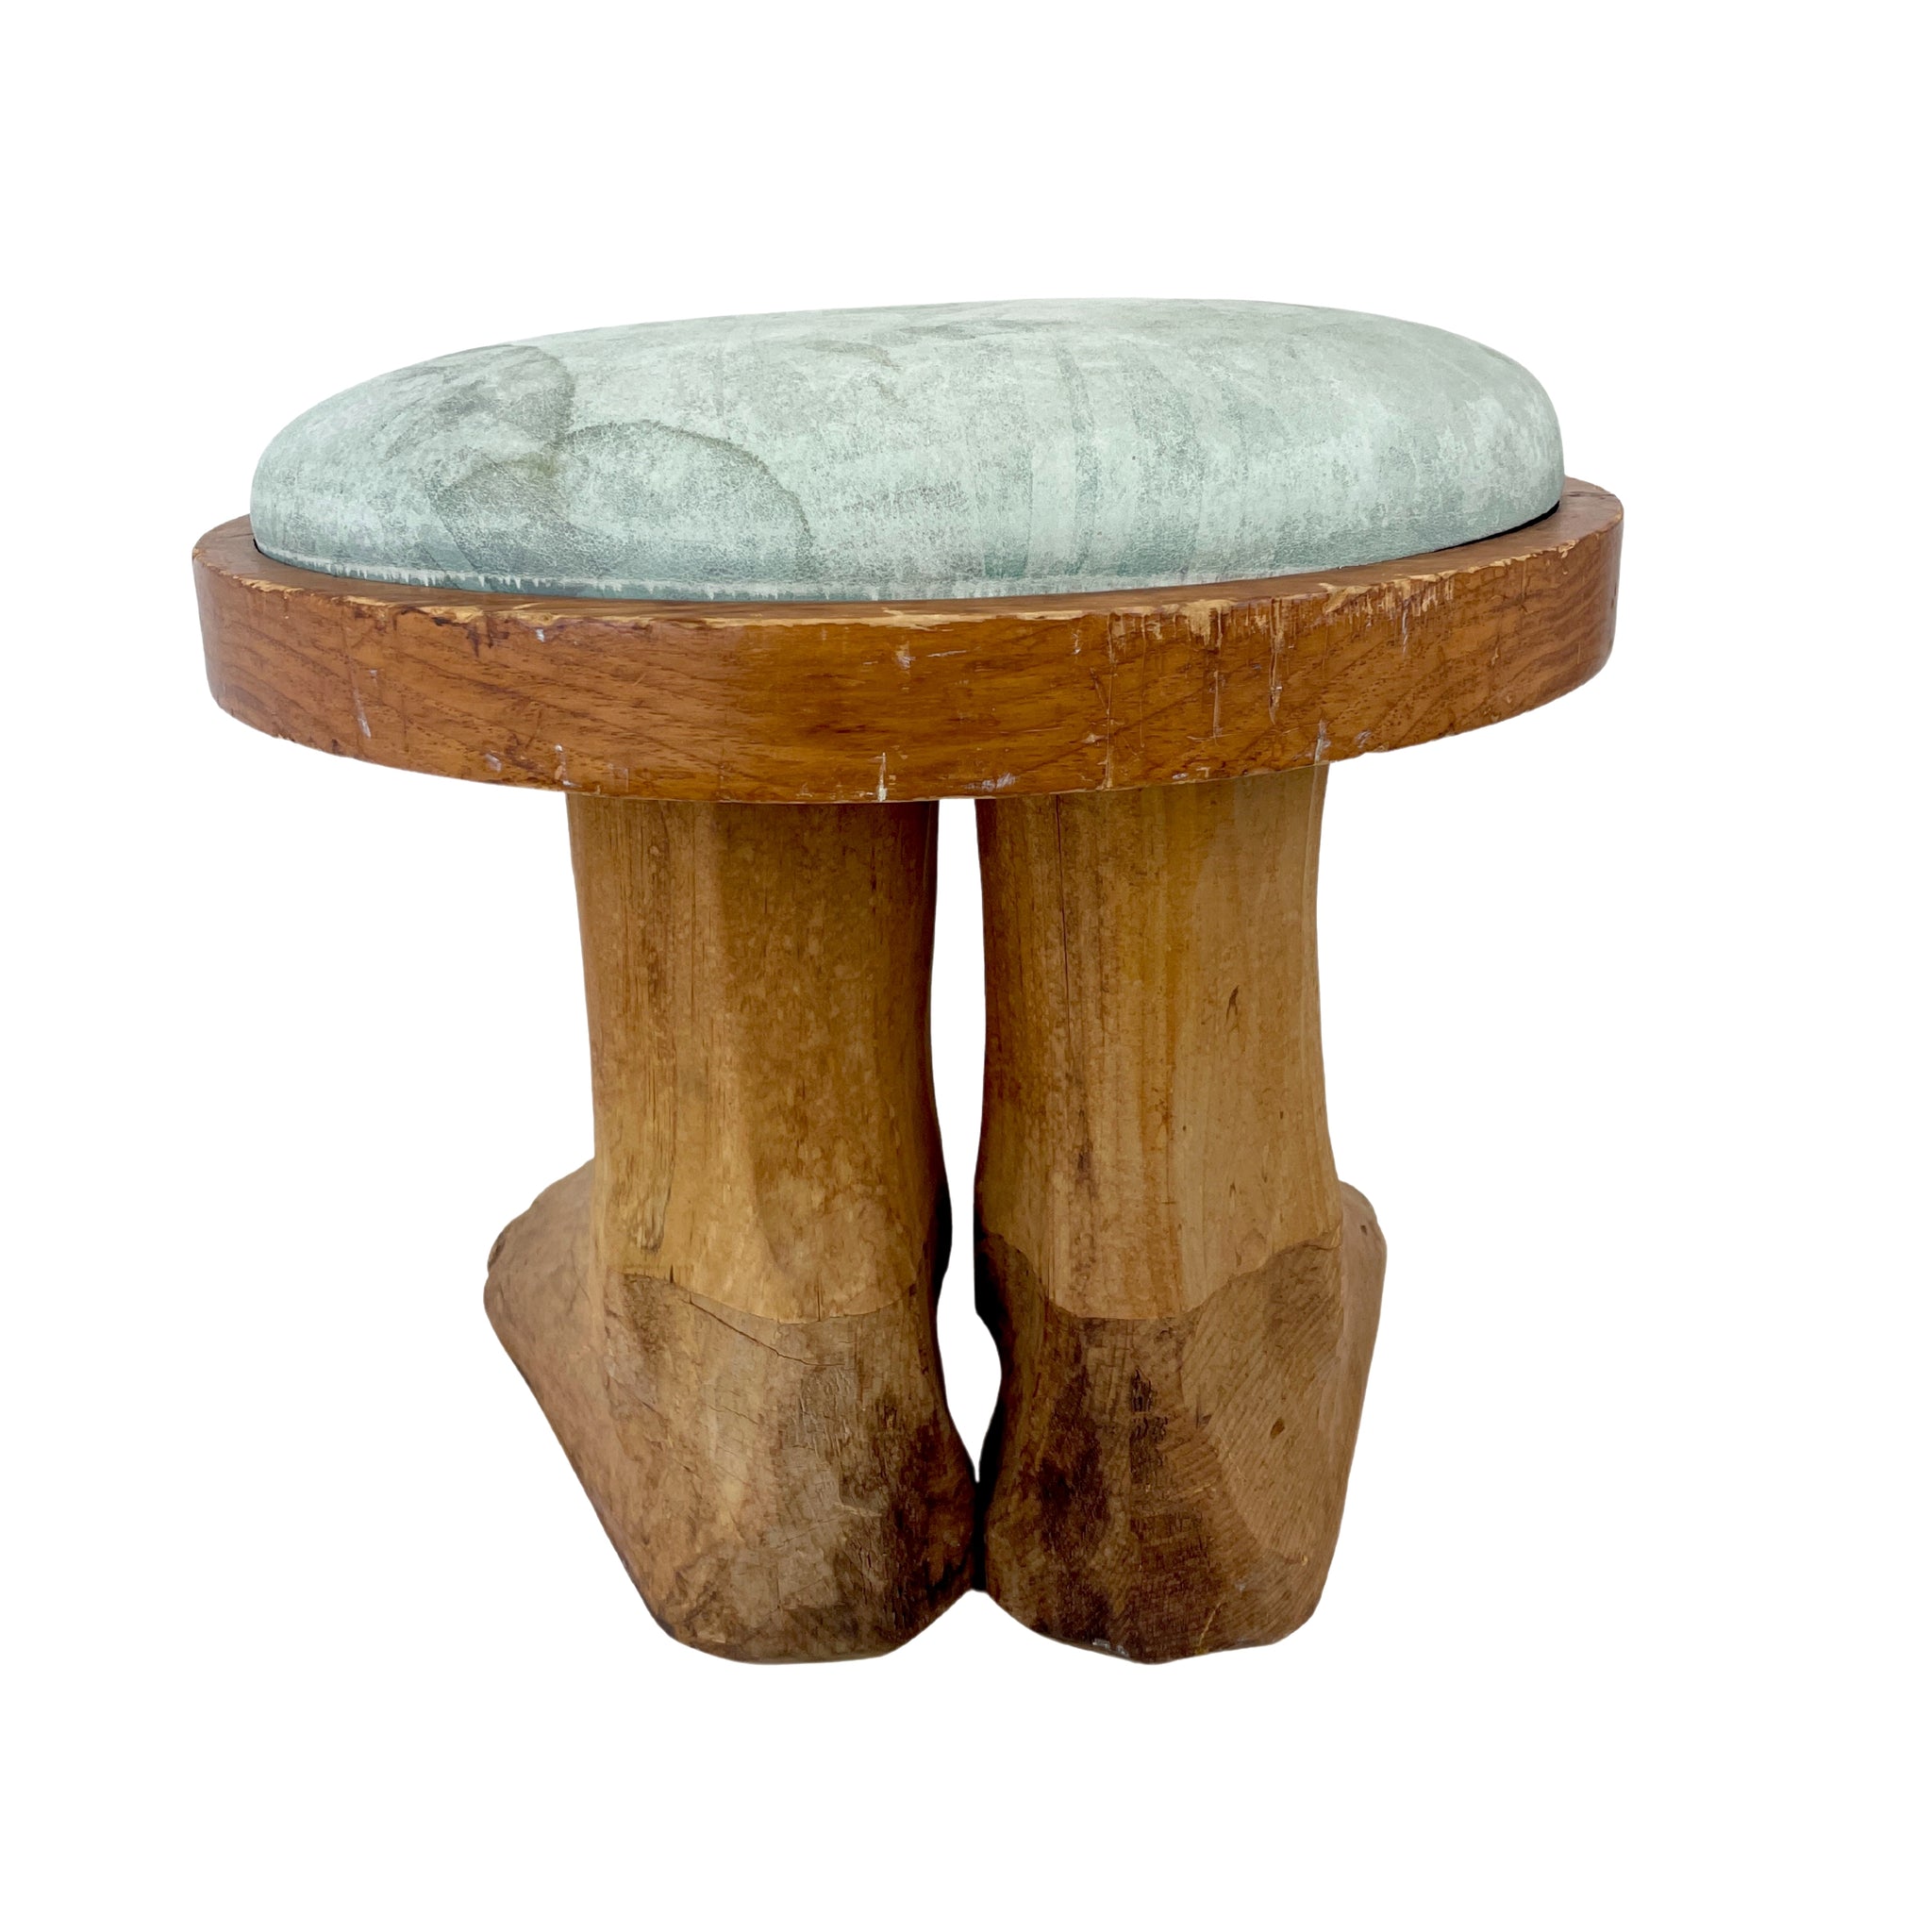 [Ringo Star] Carved Wooden Footstool - FROM THE COLLECTION OF RINGO STARR, ca. 1970